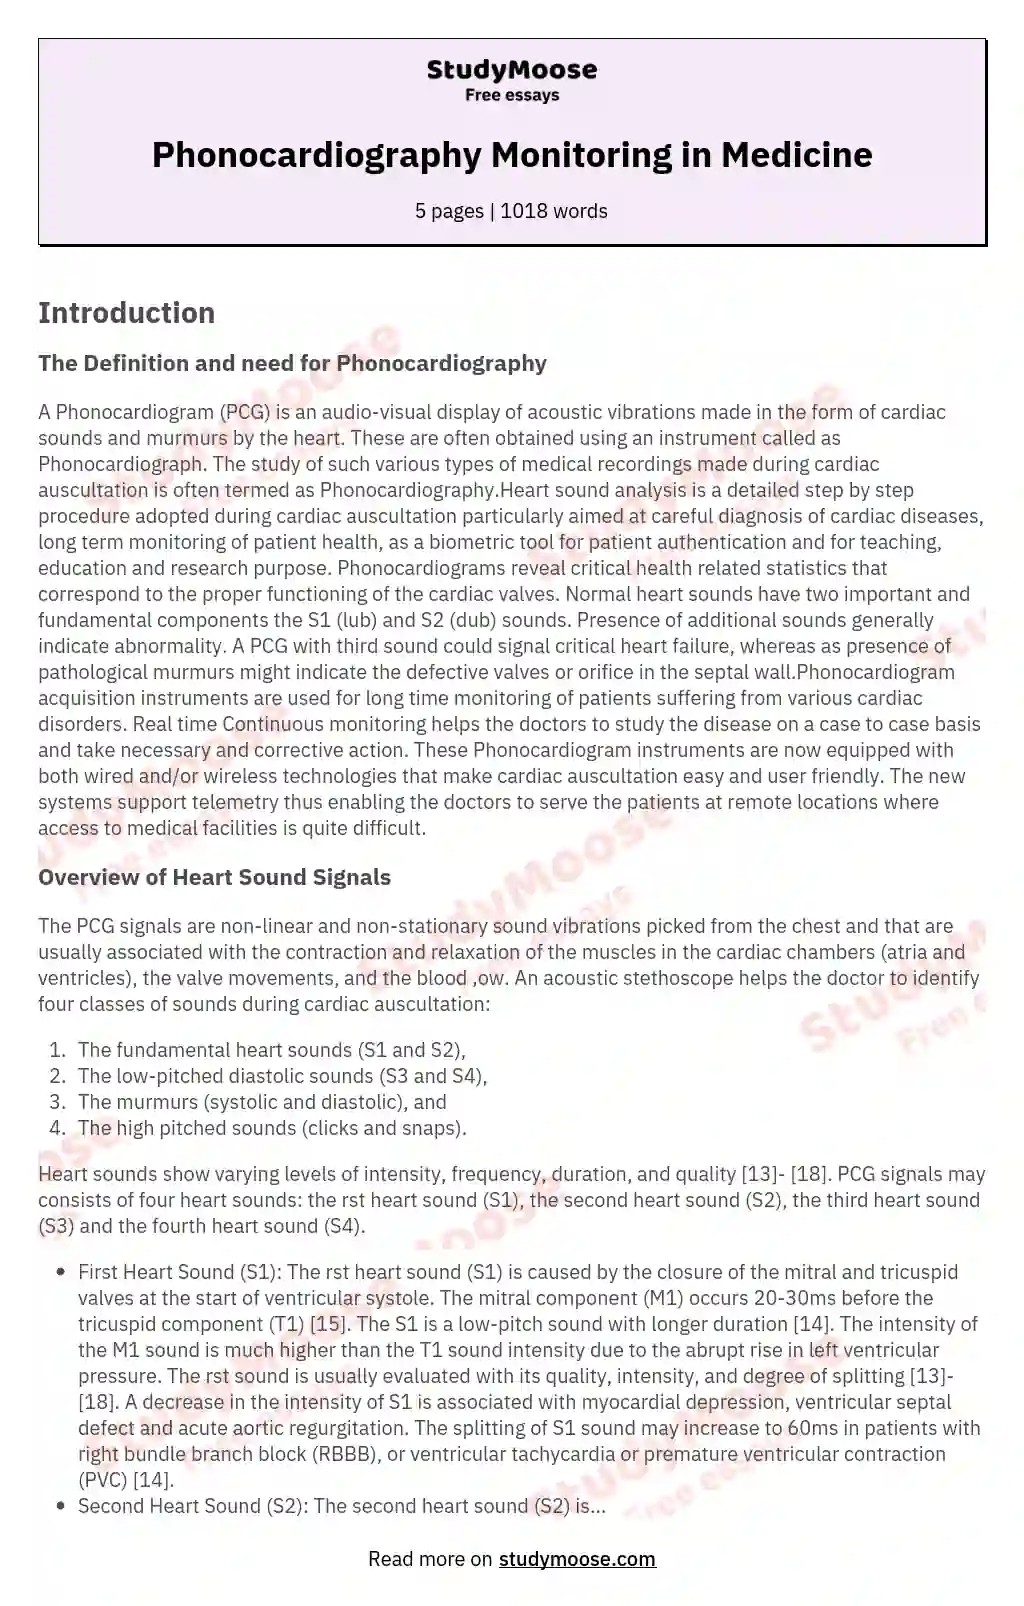 Phonocardiography Monitoring in Medicine essay